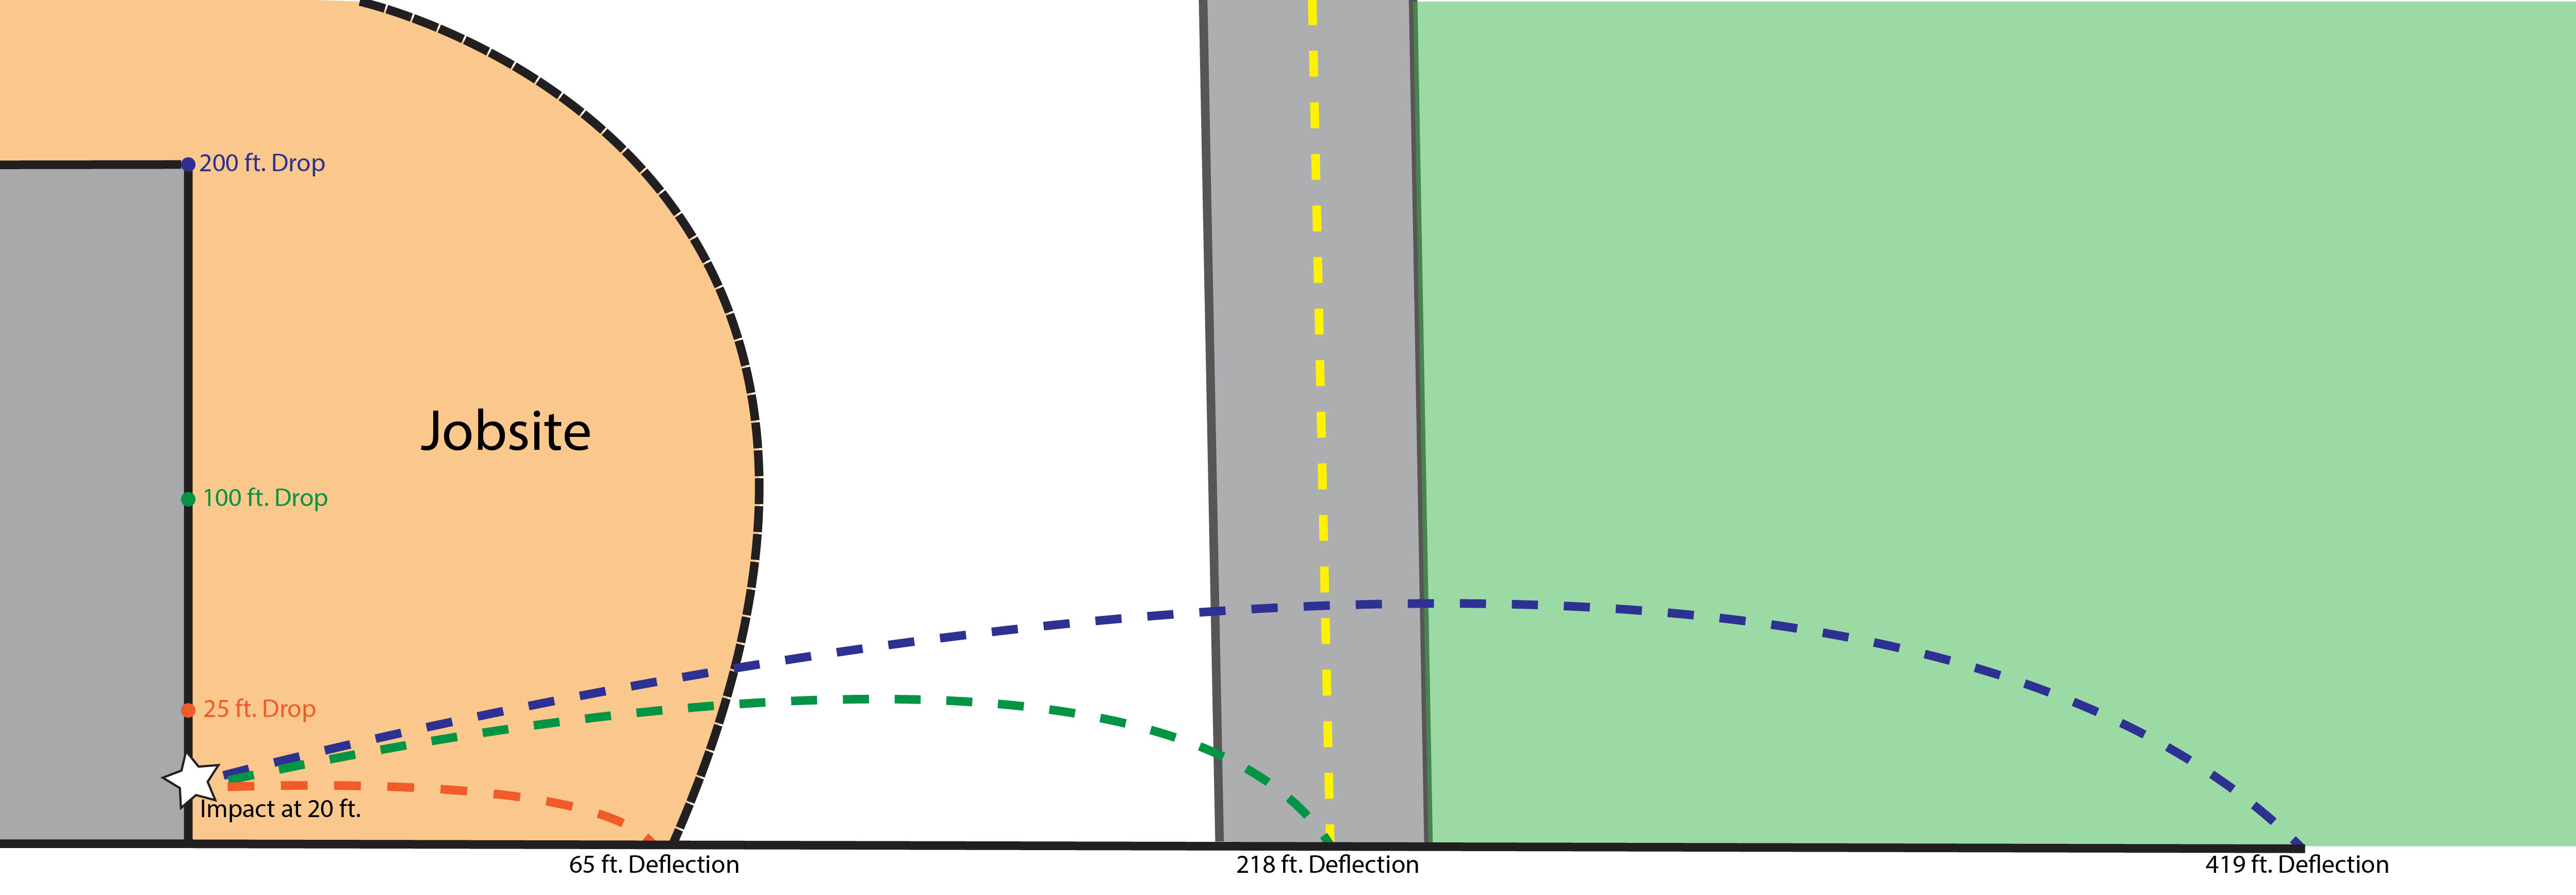 This graphic shows the possible trajectory of a fallen object that deflects at different heights